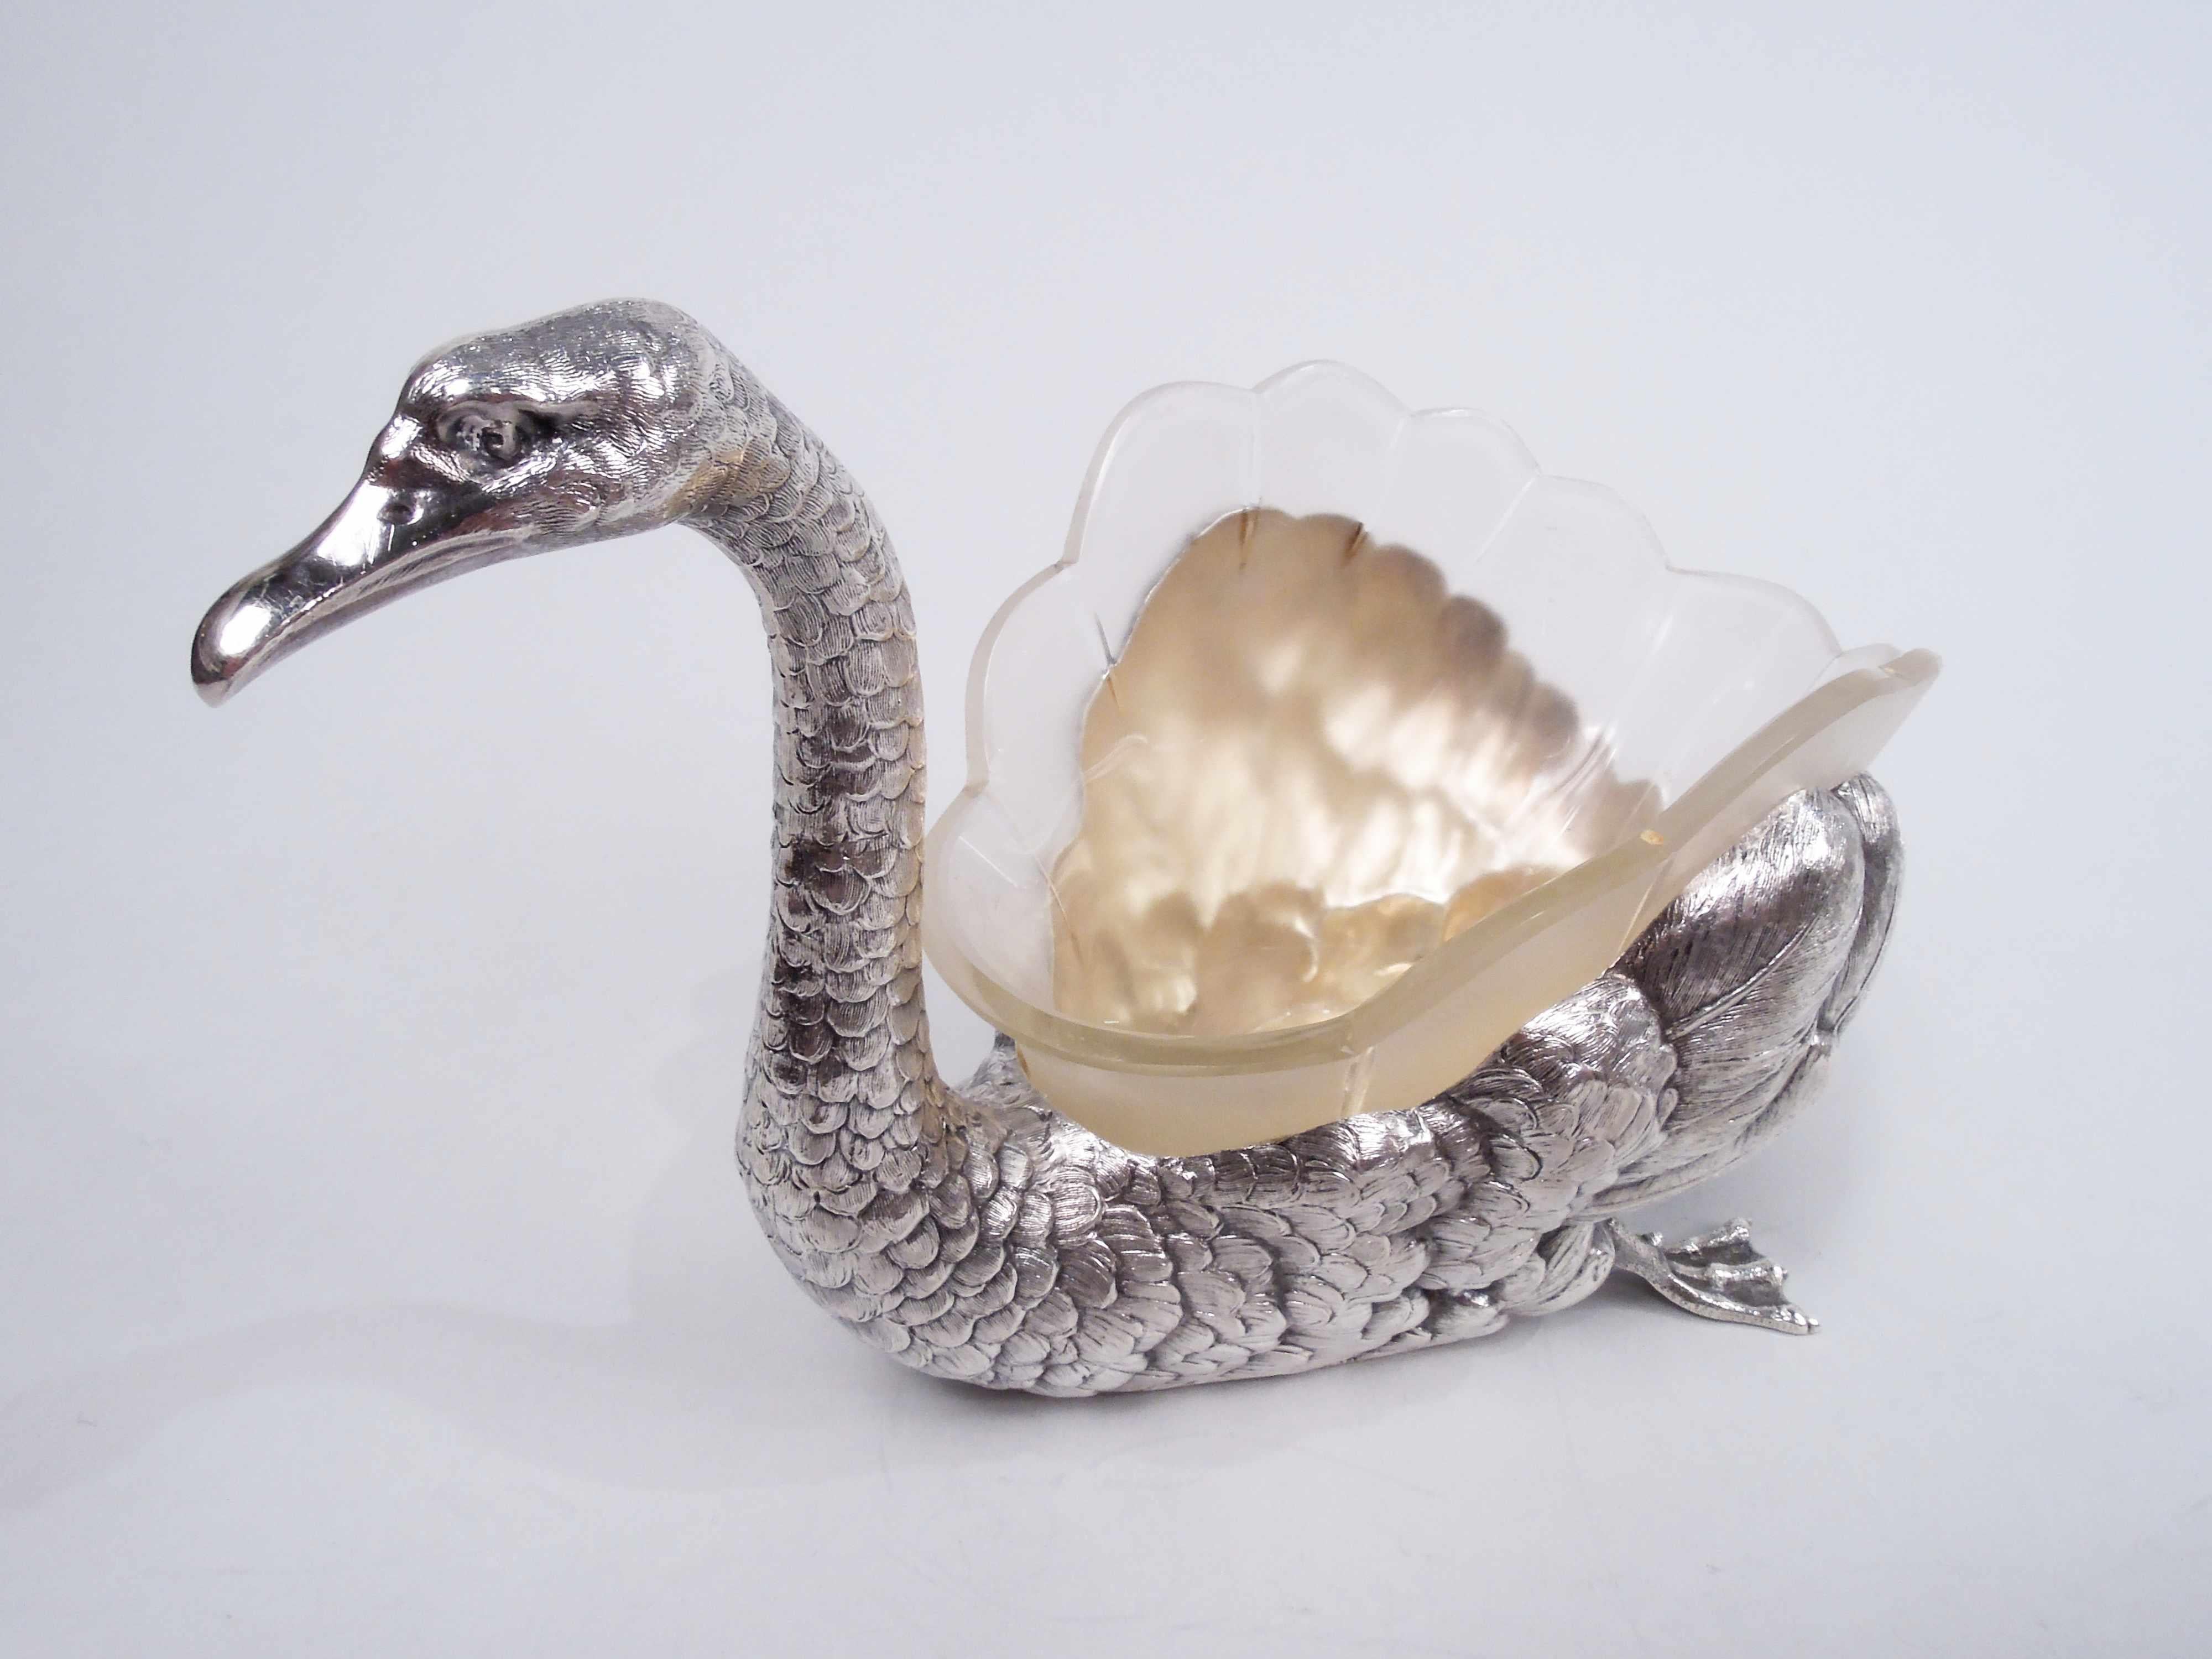 German sterling silver figural bird bowl, ca 1920. A swan with s-scroll neck, closed bill, and direct expression. Webbed feet in glide mode. Fine delineation of feathers from scaly neck to downy wing plumes. Hollow gilt-washed interior; frosted